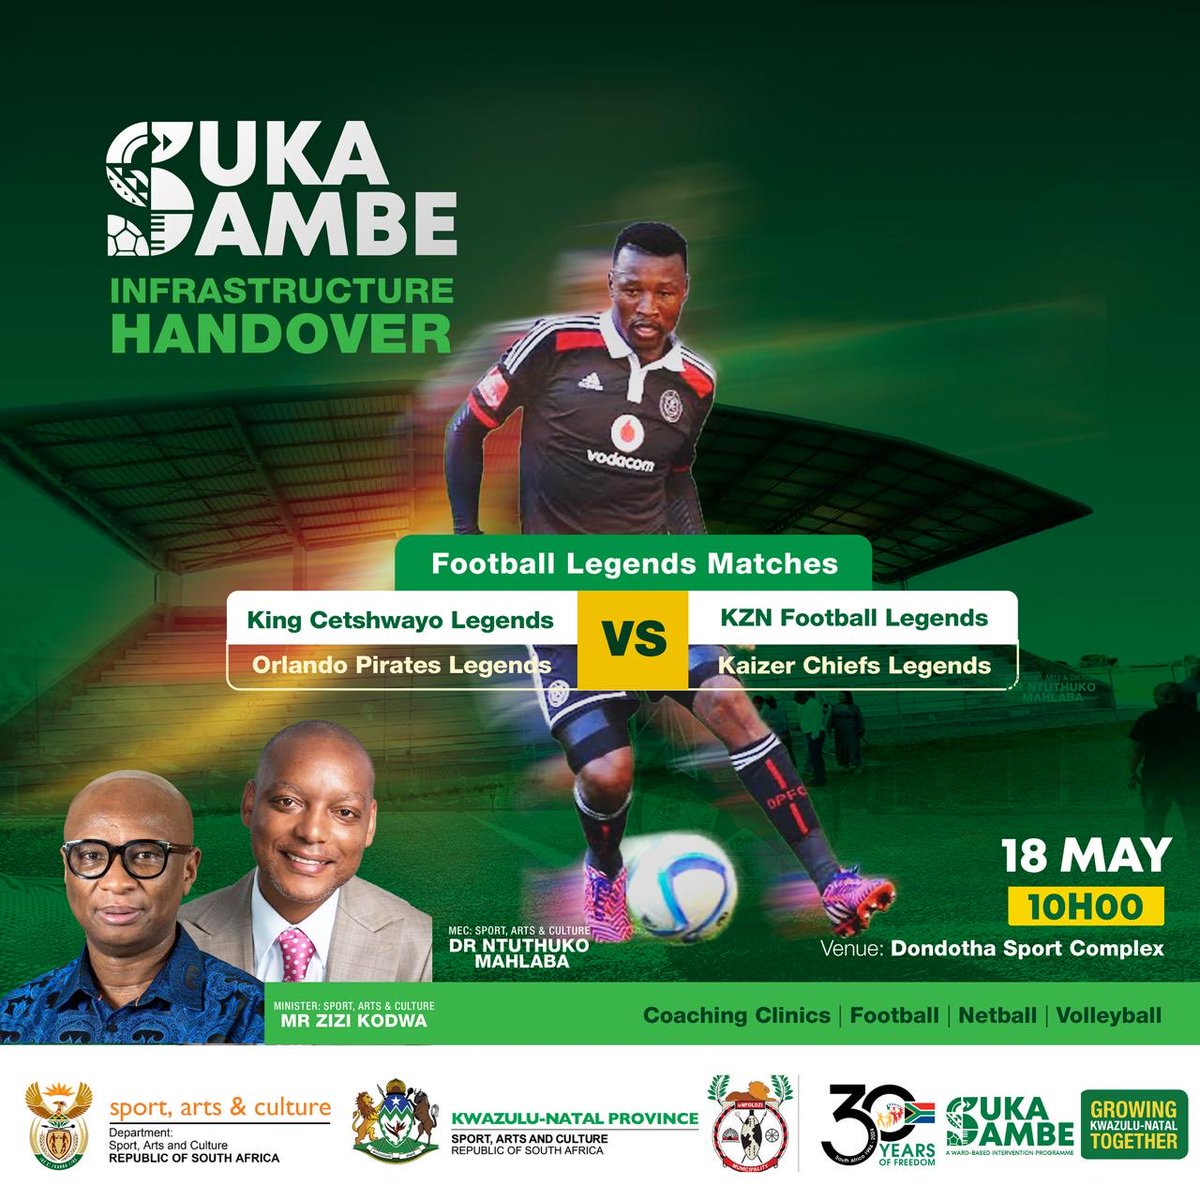 This weekend ⁦@SportArtsKZN⁩ will open gates to the R47m Dondotha Sports Complex which will be handed over to the local community. The handover function will also serve to honour Siyabonga Sangweni, a local sporting hero. #sukasambe #activeandwinningkzn #30yearsoffreedom